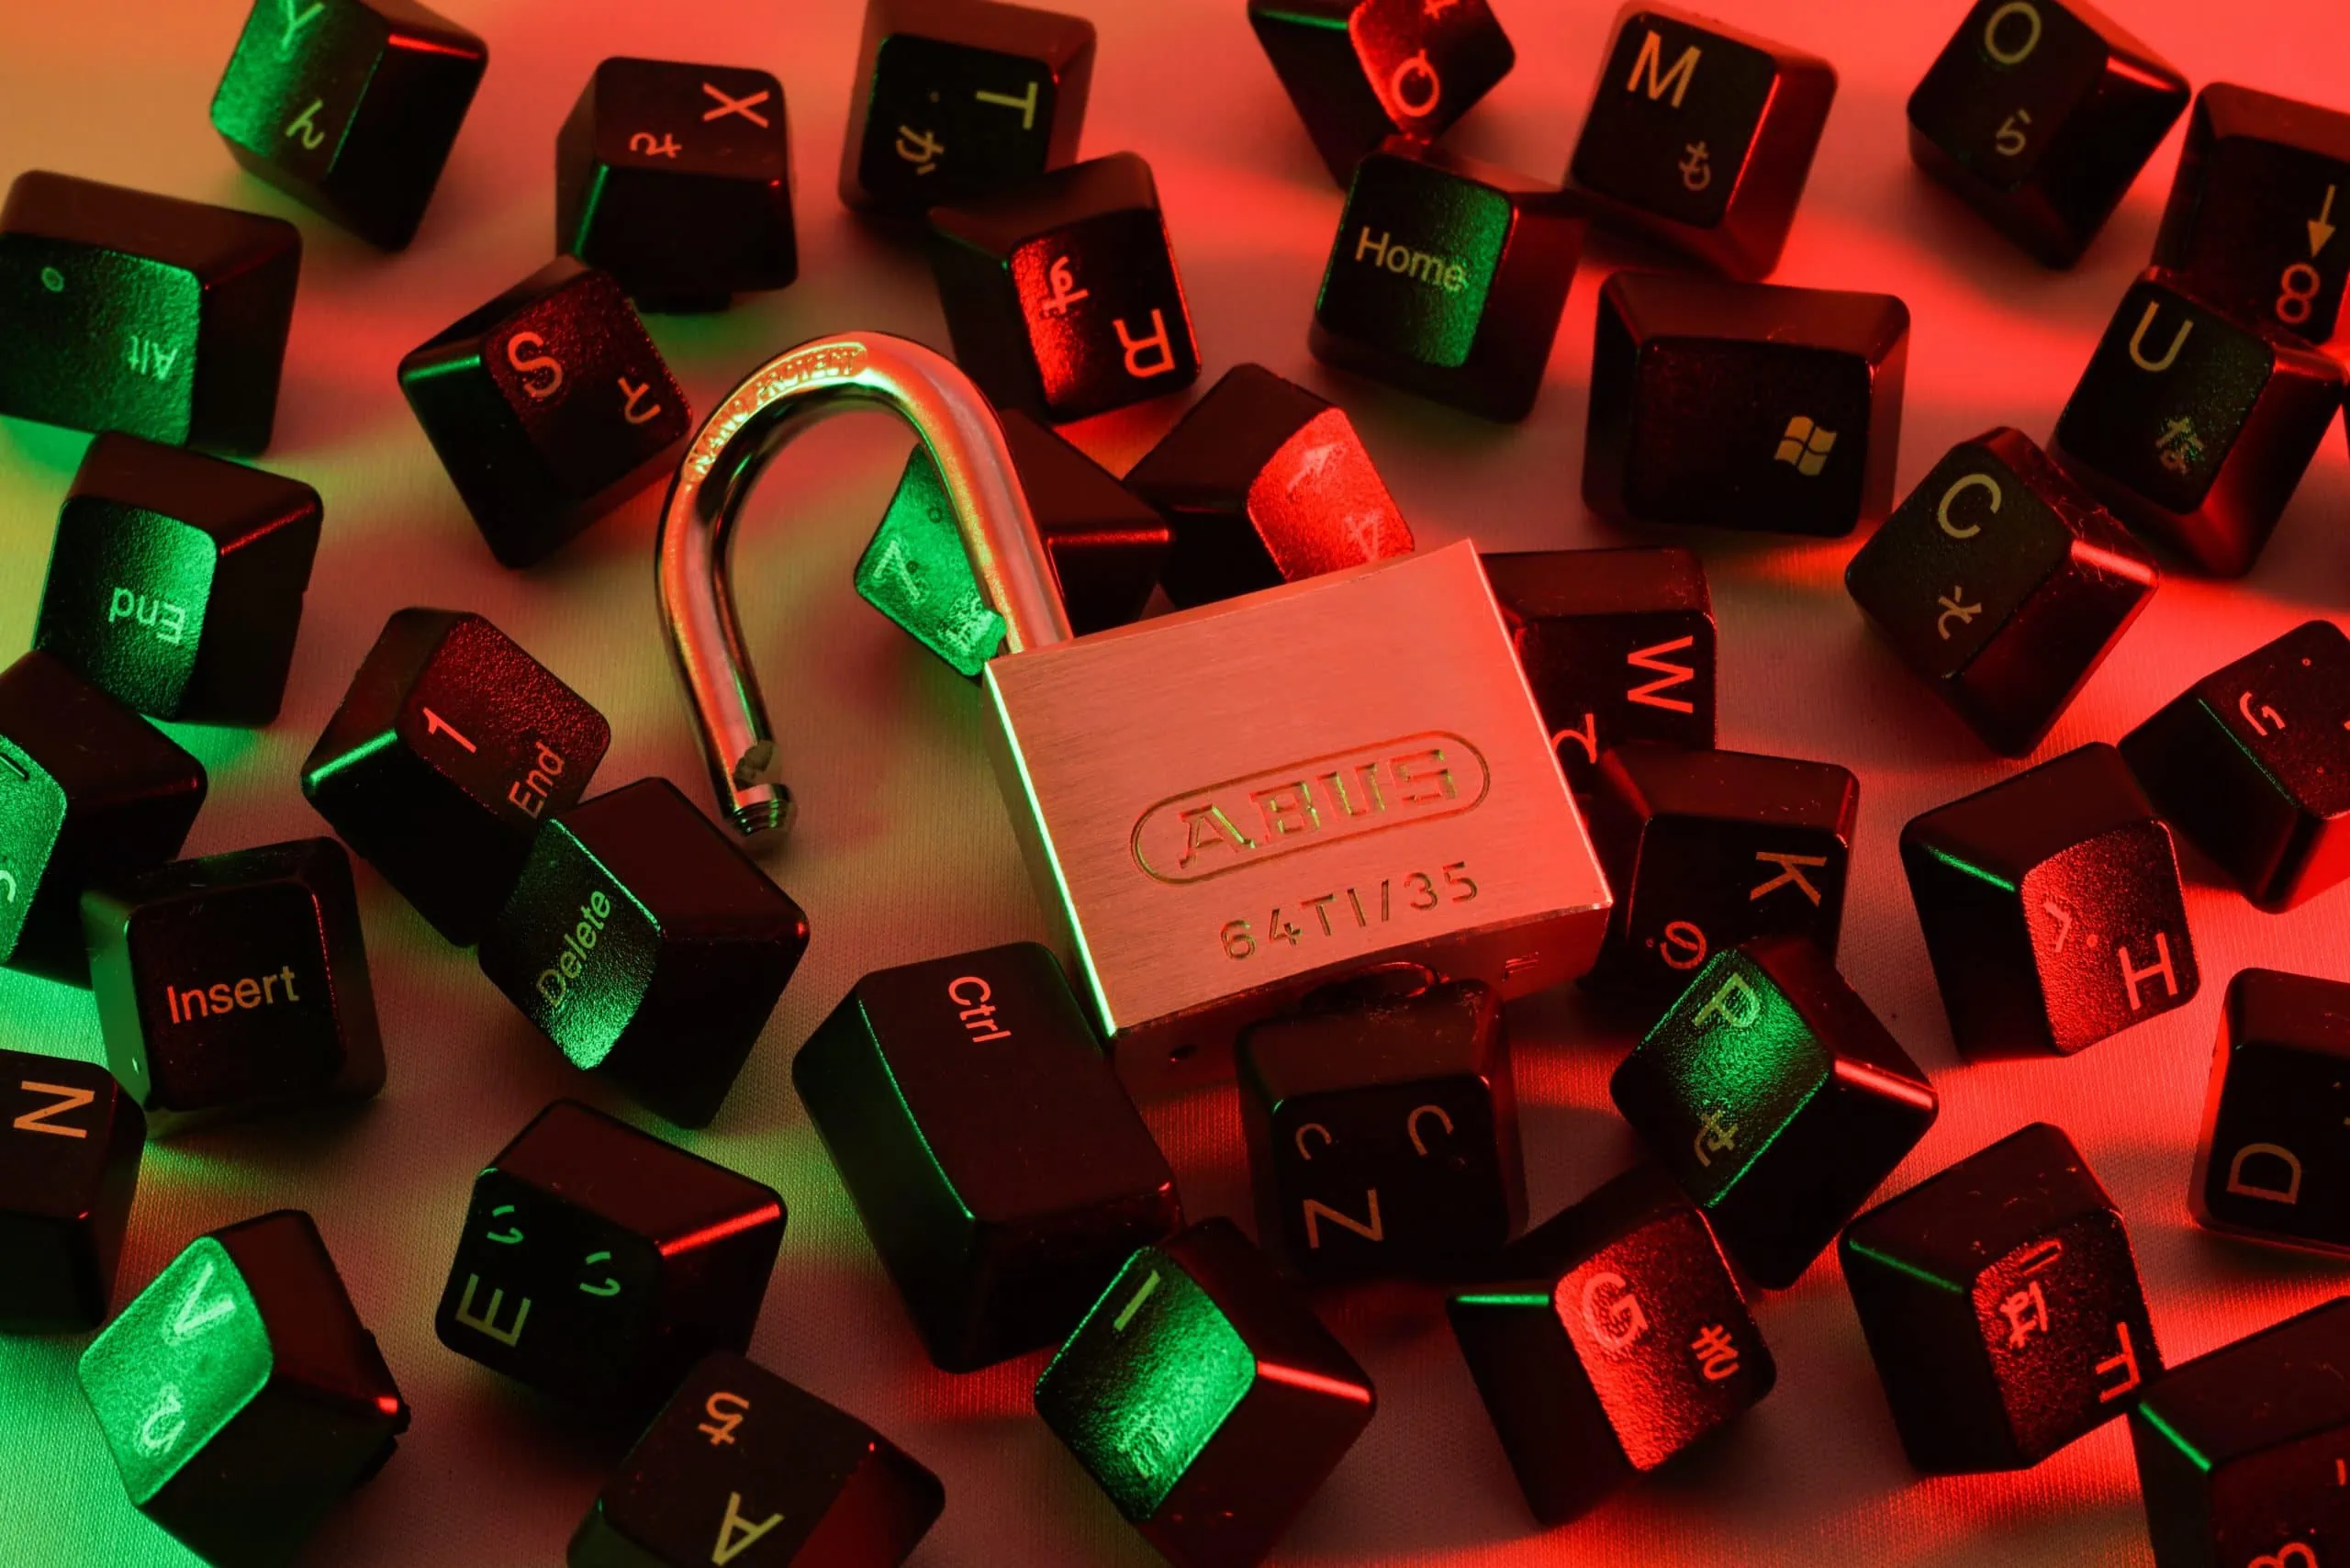 Lock surrounding keycaps depicting cyber security